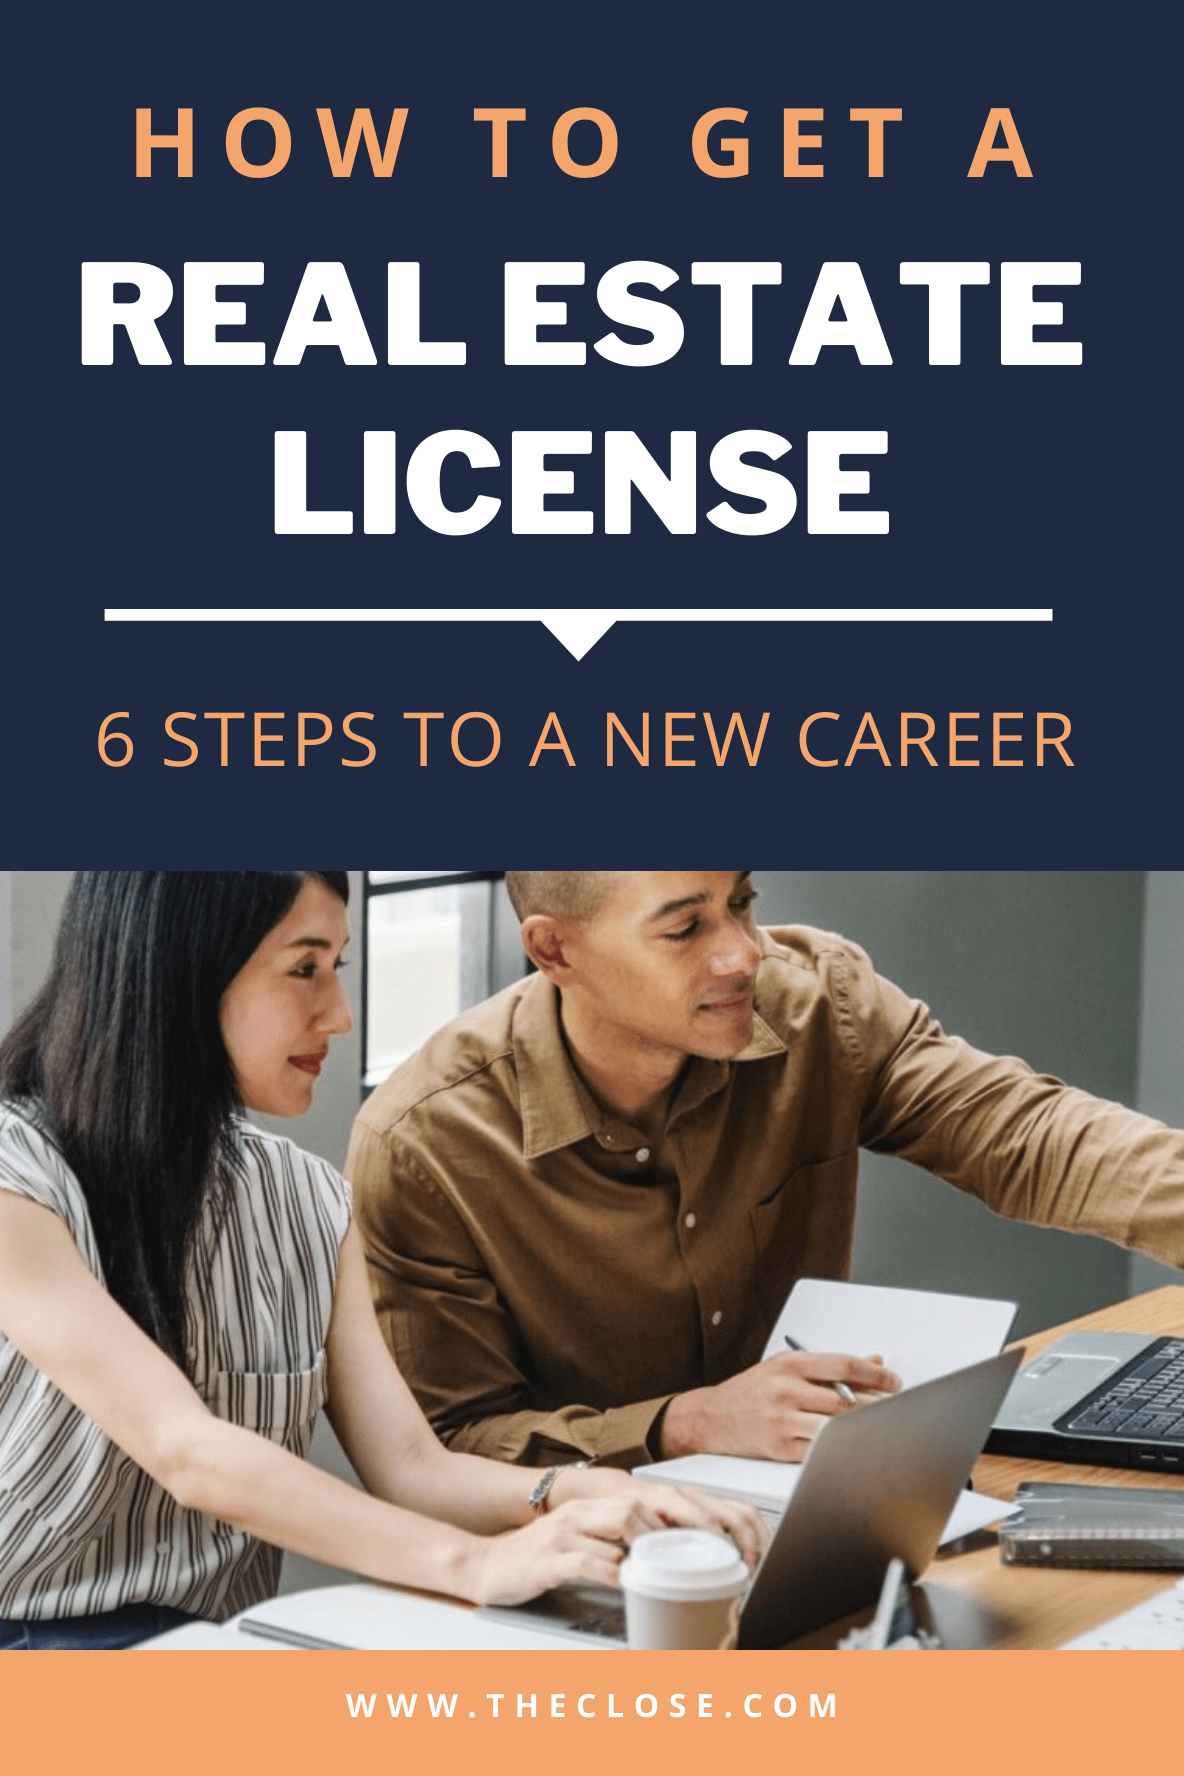 What jobs can you get with a real estate license